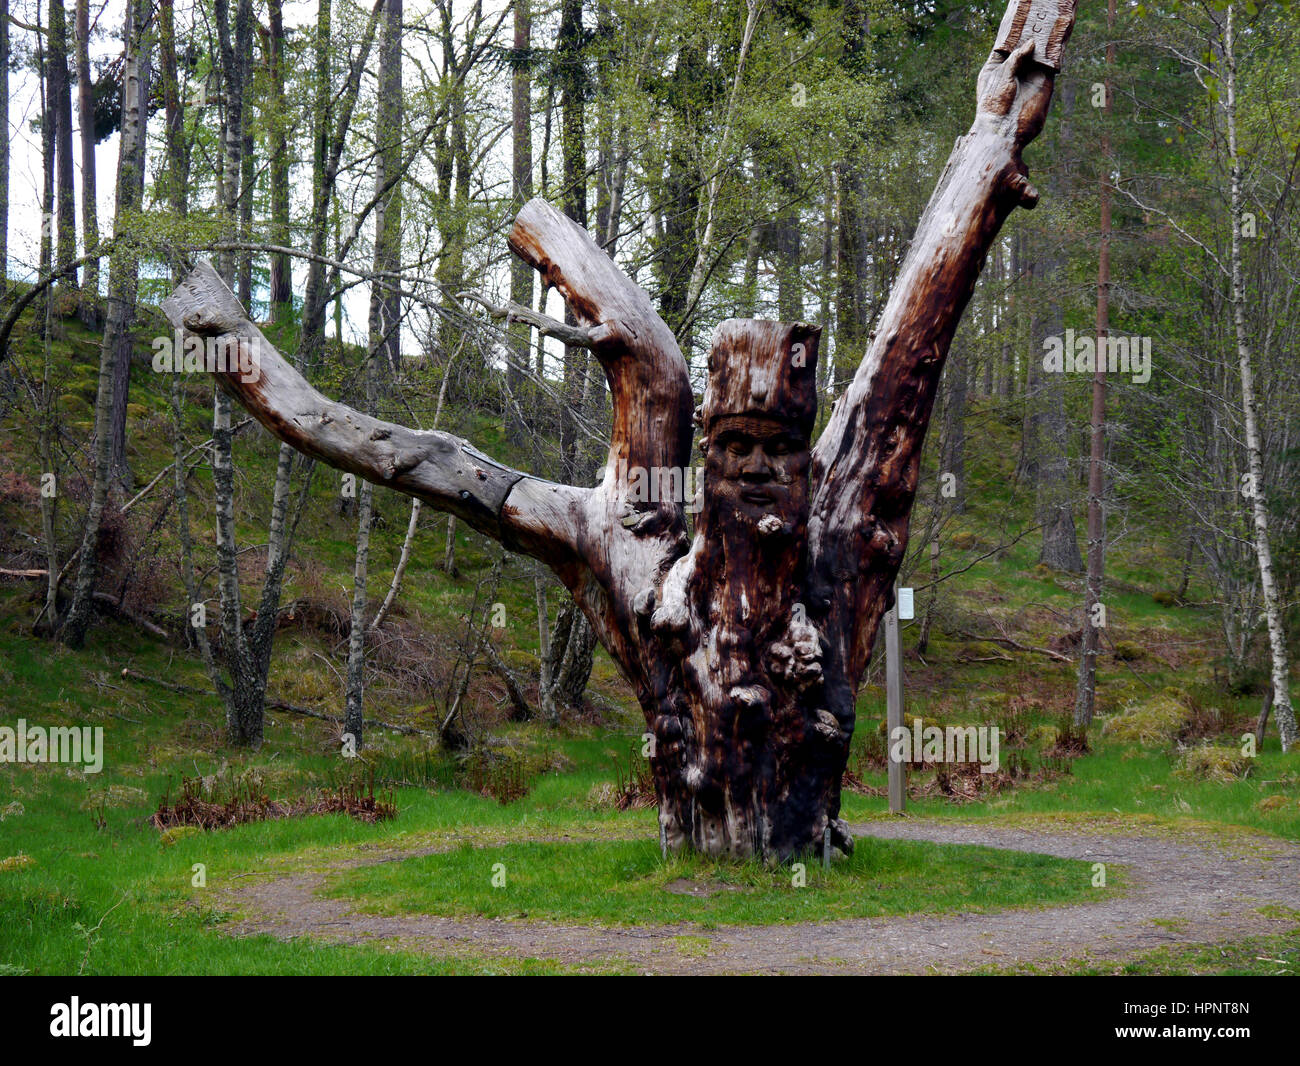 A Wooden Tree Sculpture called Archetype part of the Frank Bruce Sculpture Trail, Inshriach Forest, Feshiebridge,Cairngorms National Park, Scotland. Stock Photo